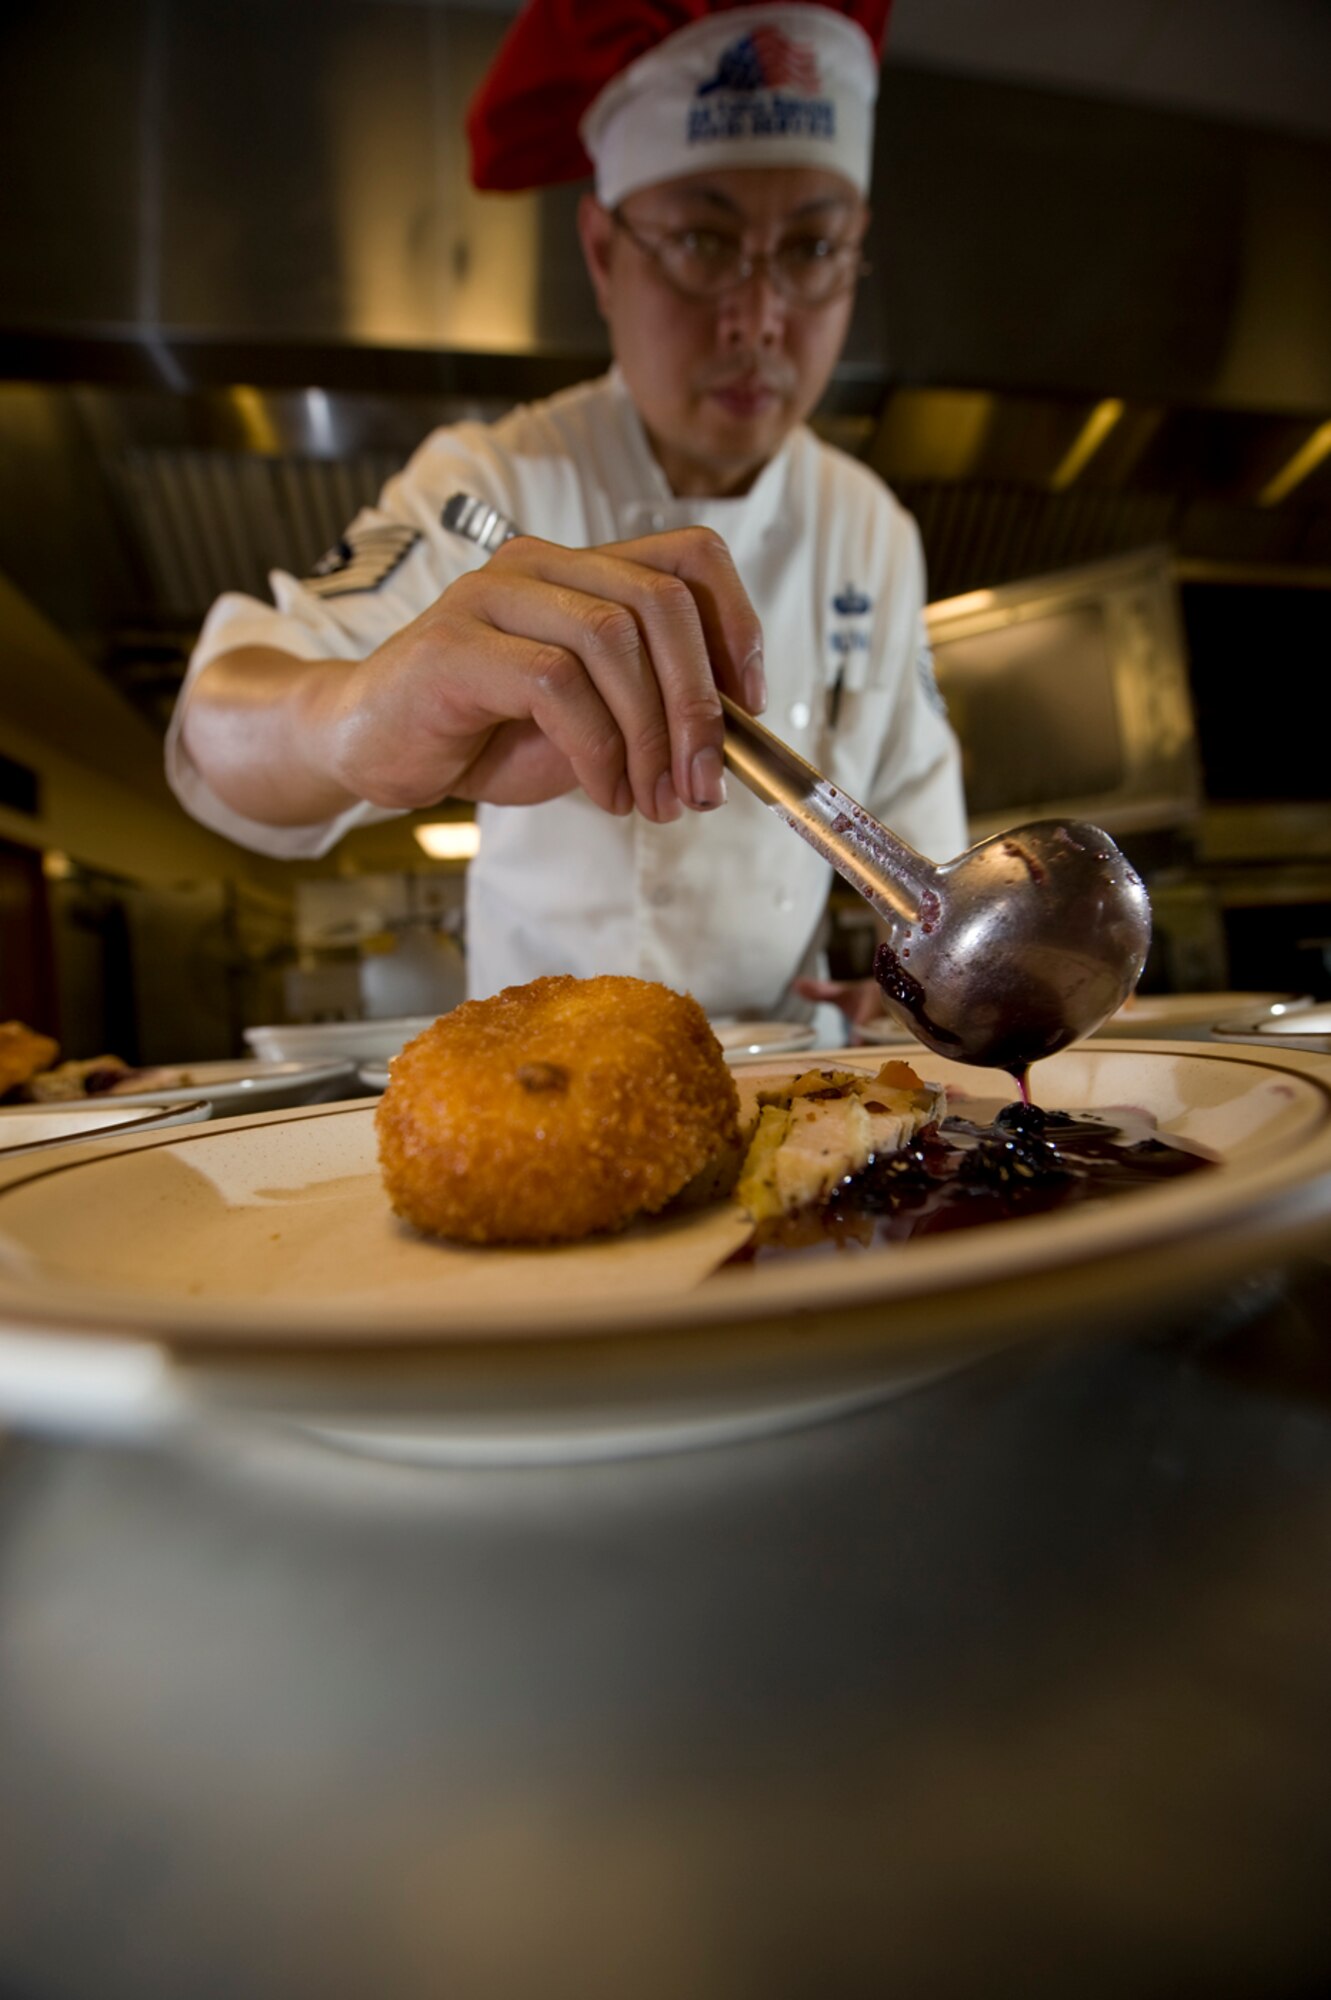 Re-creating a dish that won on the Emeril Live show, Chef Nuval makes rainbow fruit stuffed pork tenderloin and cheddar fried grits, with blueberry coulees. (photo by Tech. Sgt. Matthew Hannen)